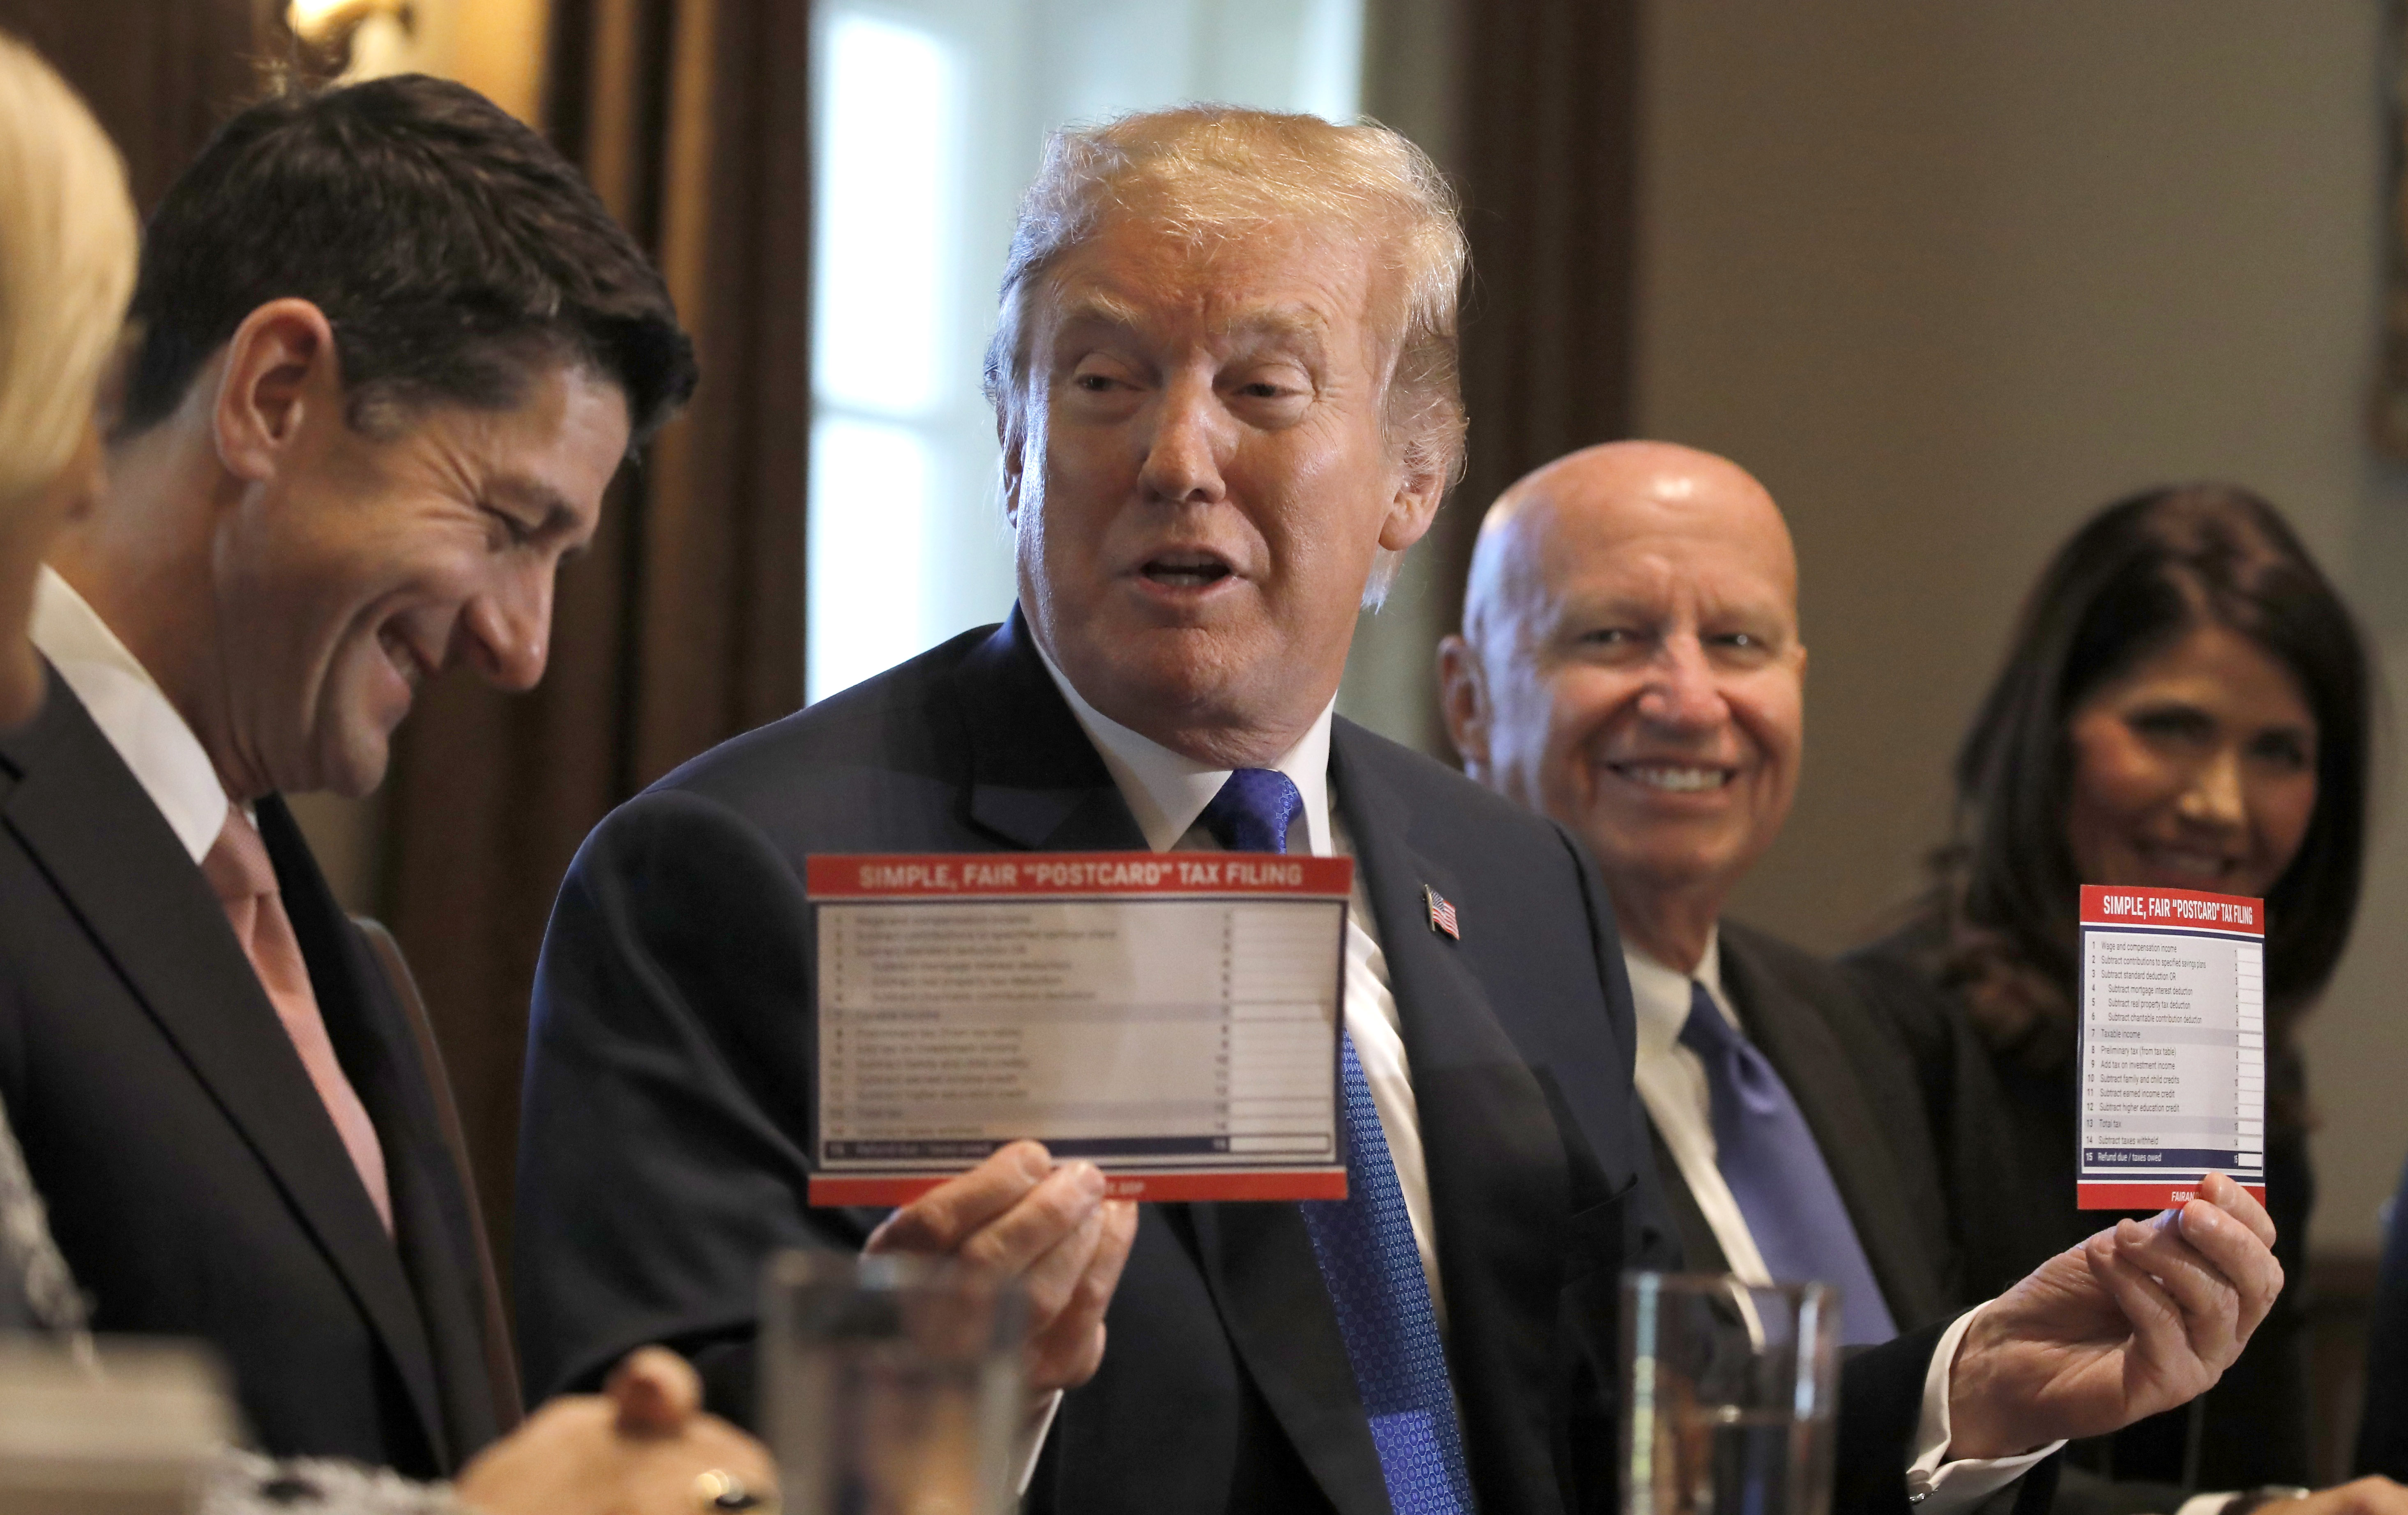 One-Third of Middle Class Families Could End Up Paying More Under the GOP Tax Plan, Experts Say